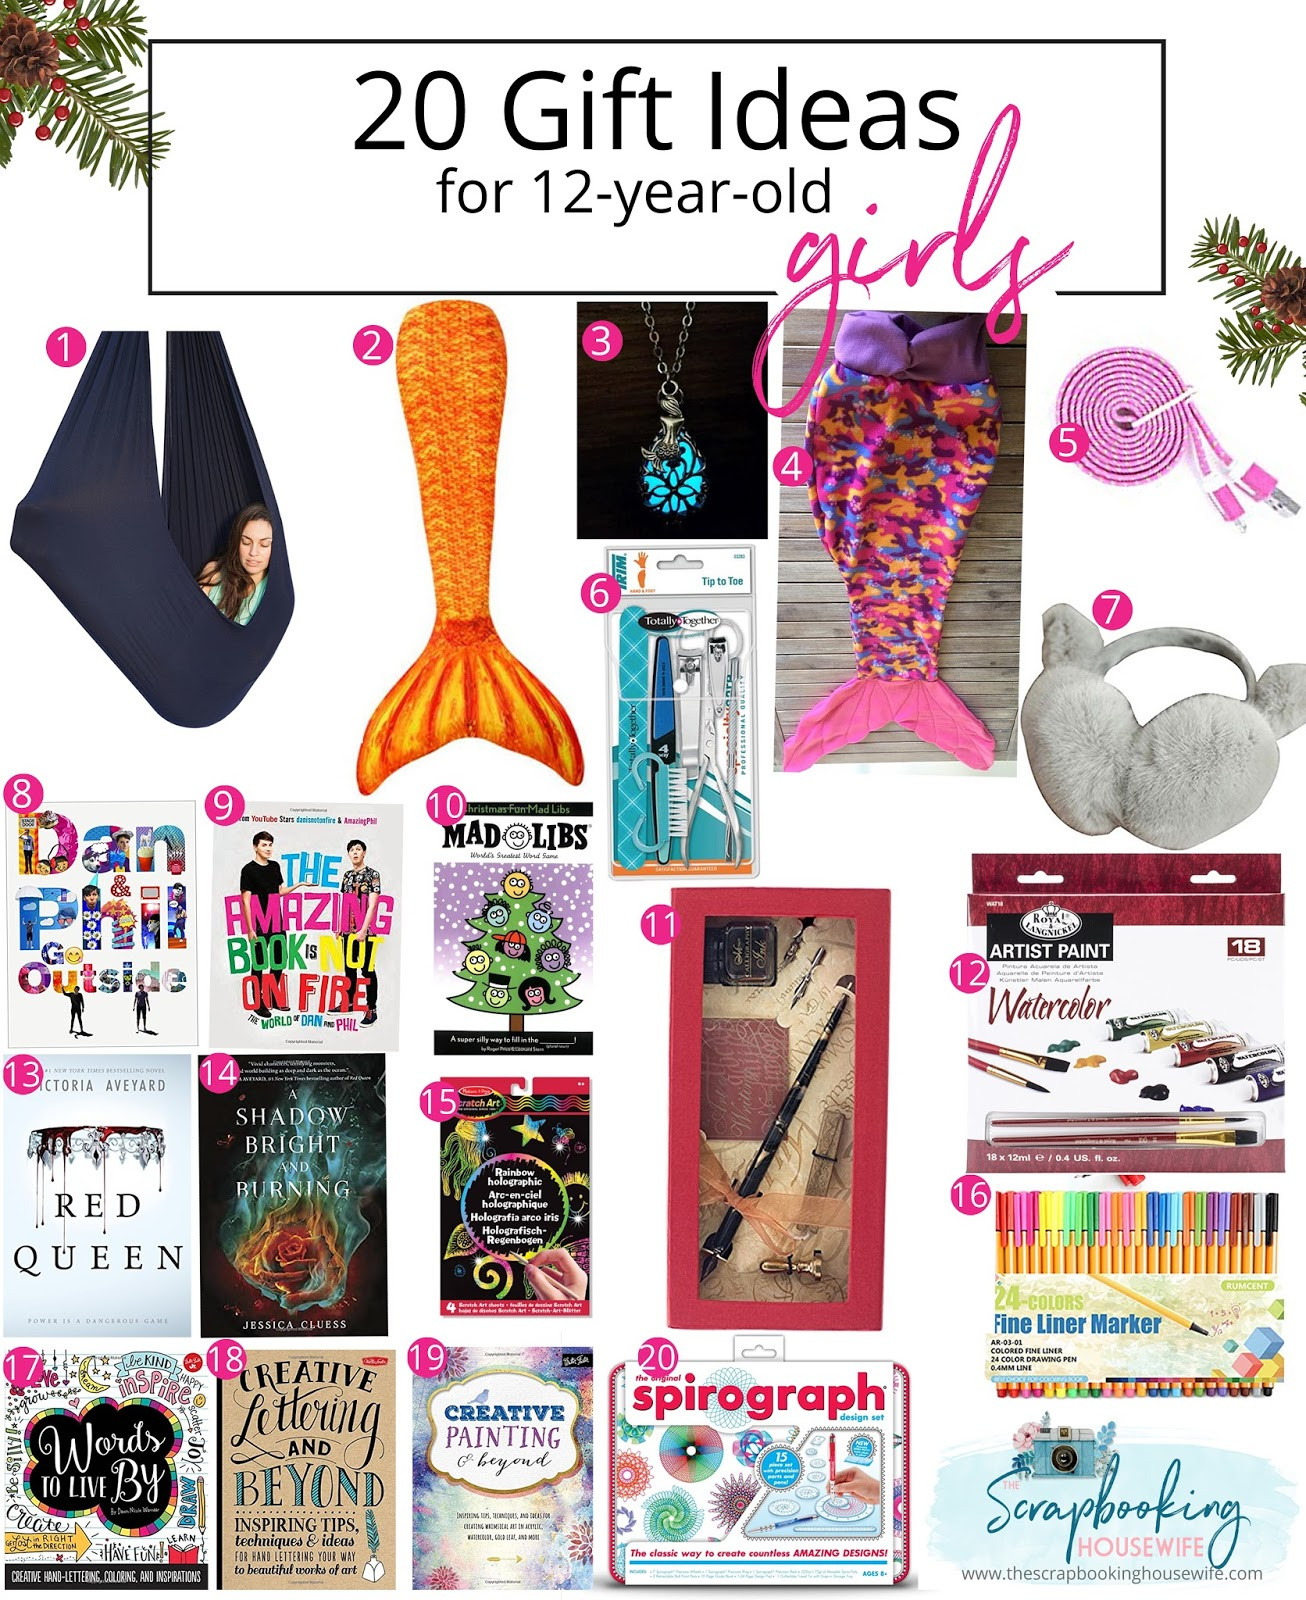 Christmas Gift Ideas For 12 Yr Old Girl
 Ellabella Designs 13 GIFT IDEAS FOR TODDLERS